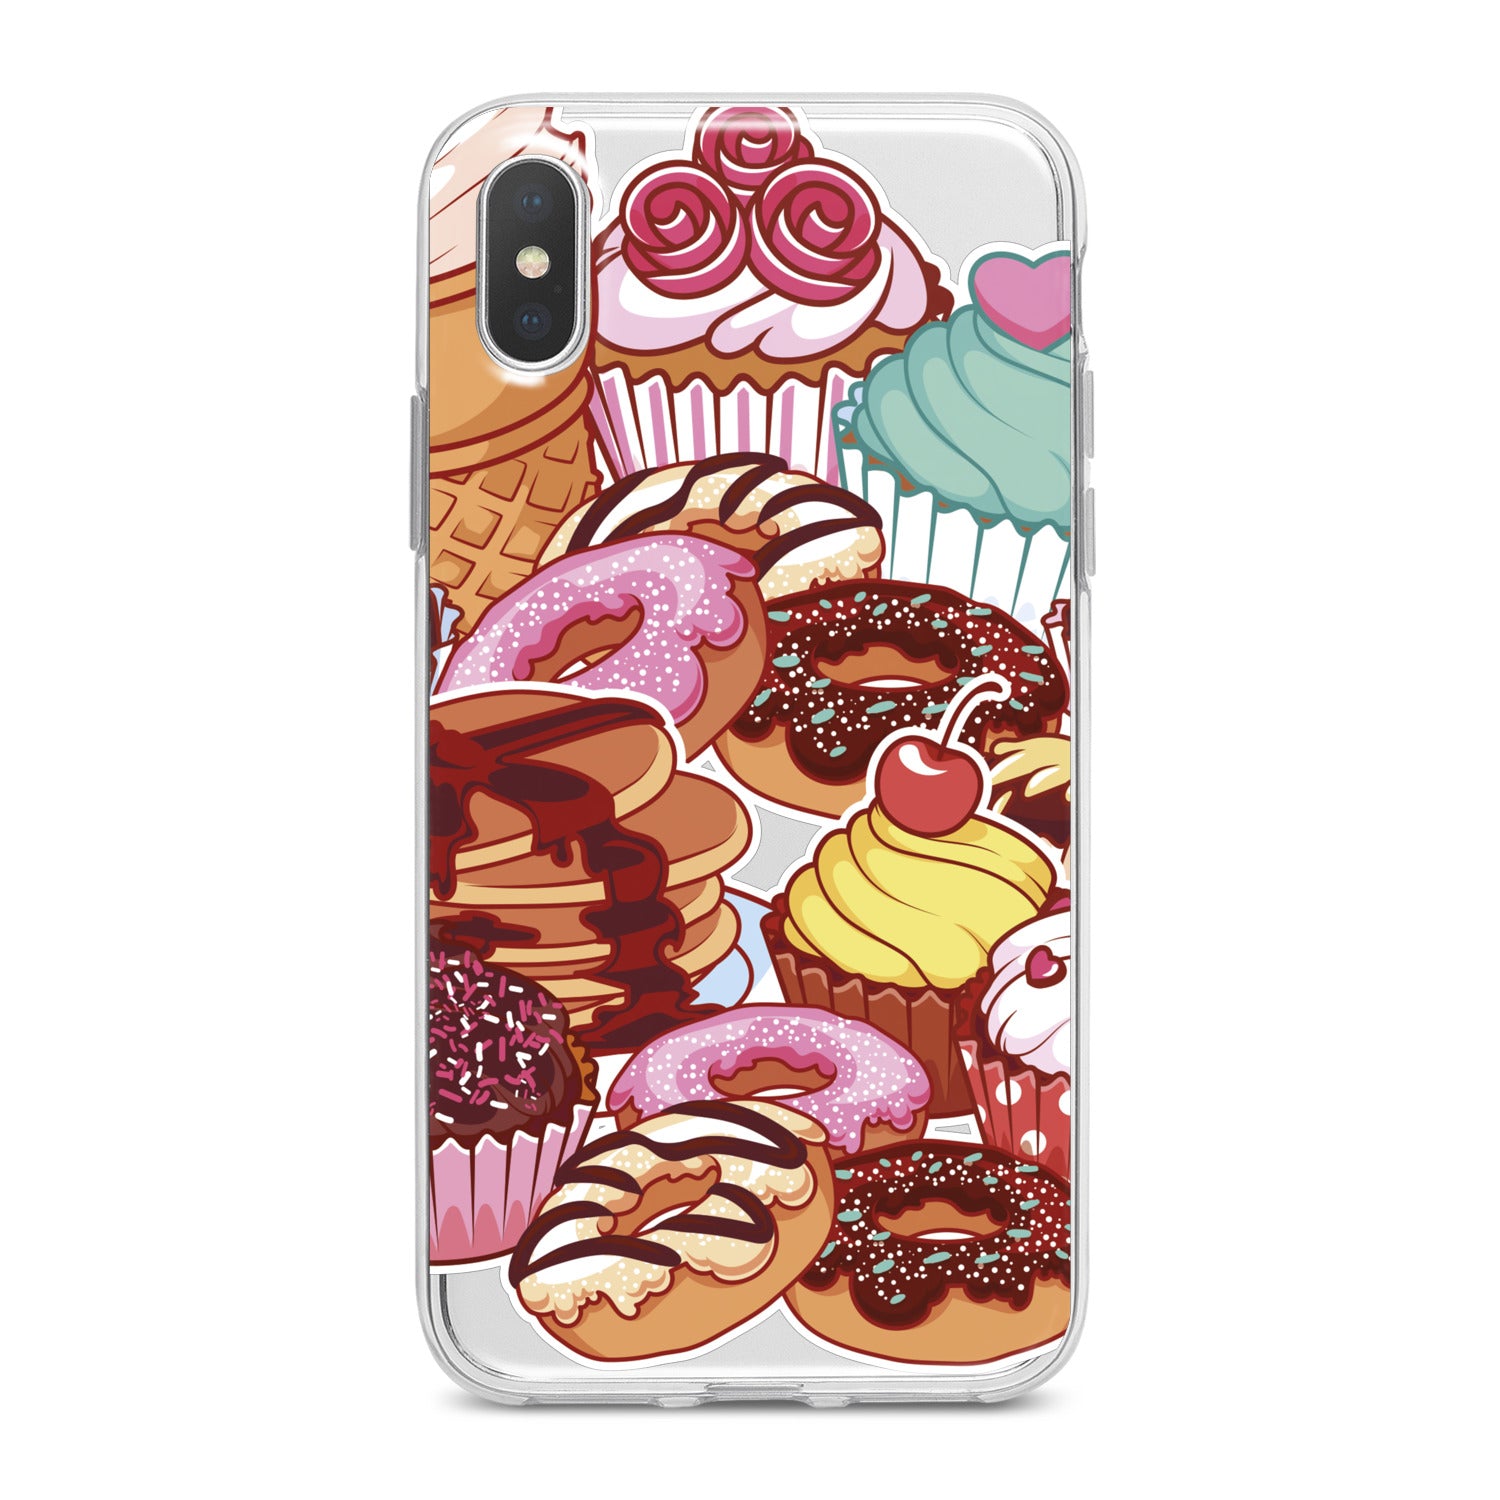 Lex Altern Sweet Donut Phone Case for your iPhone & Android phone.